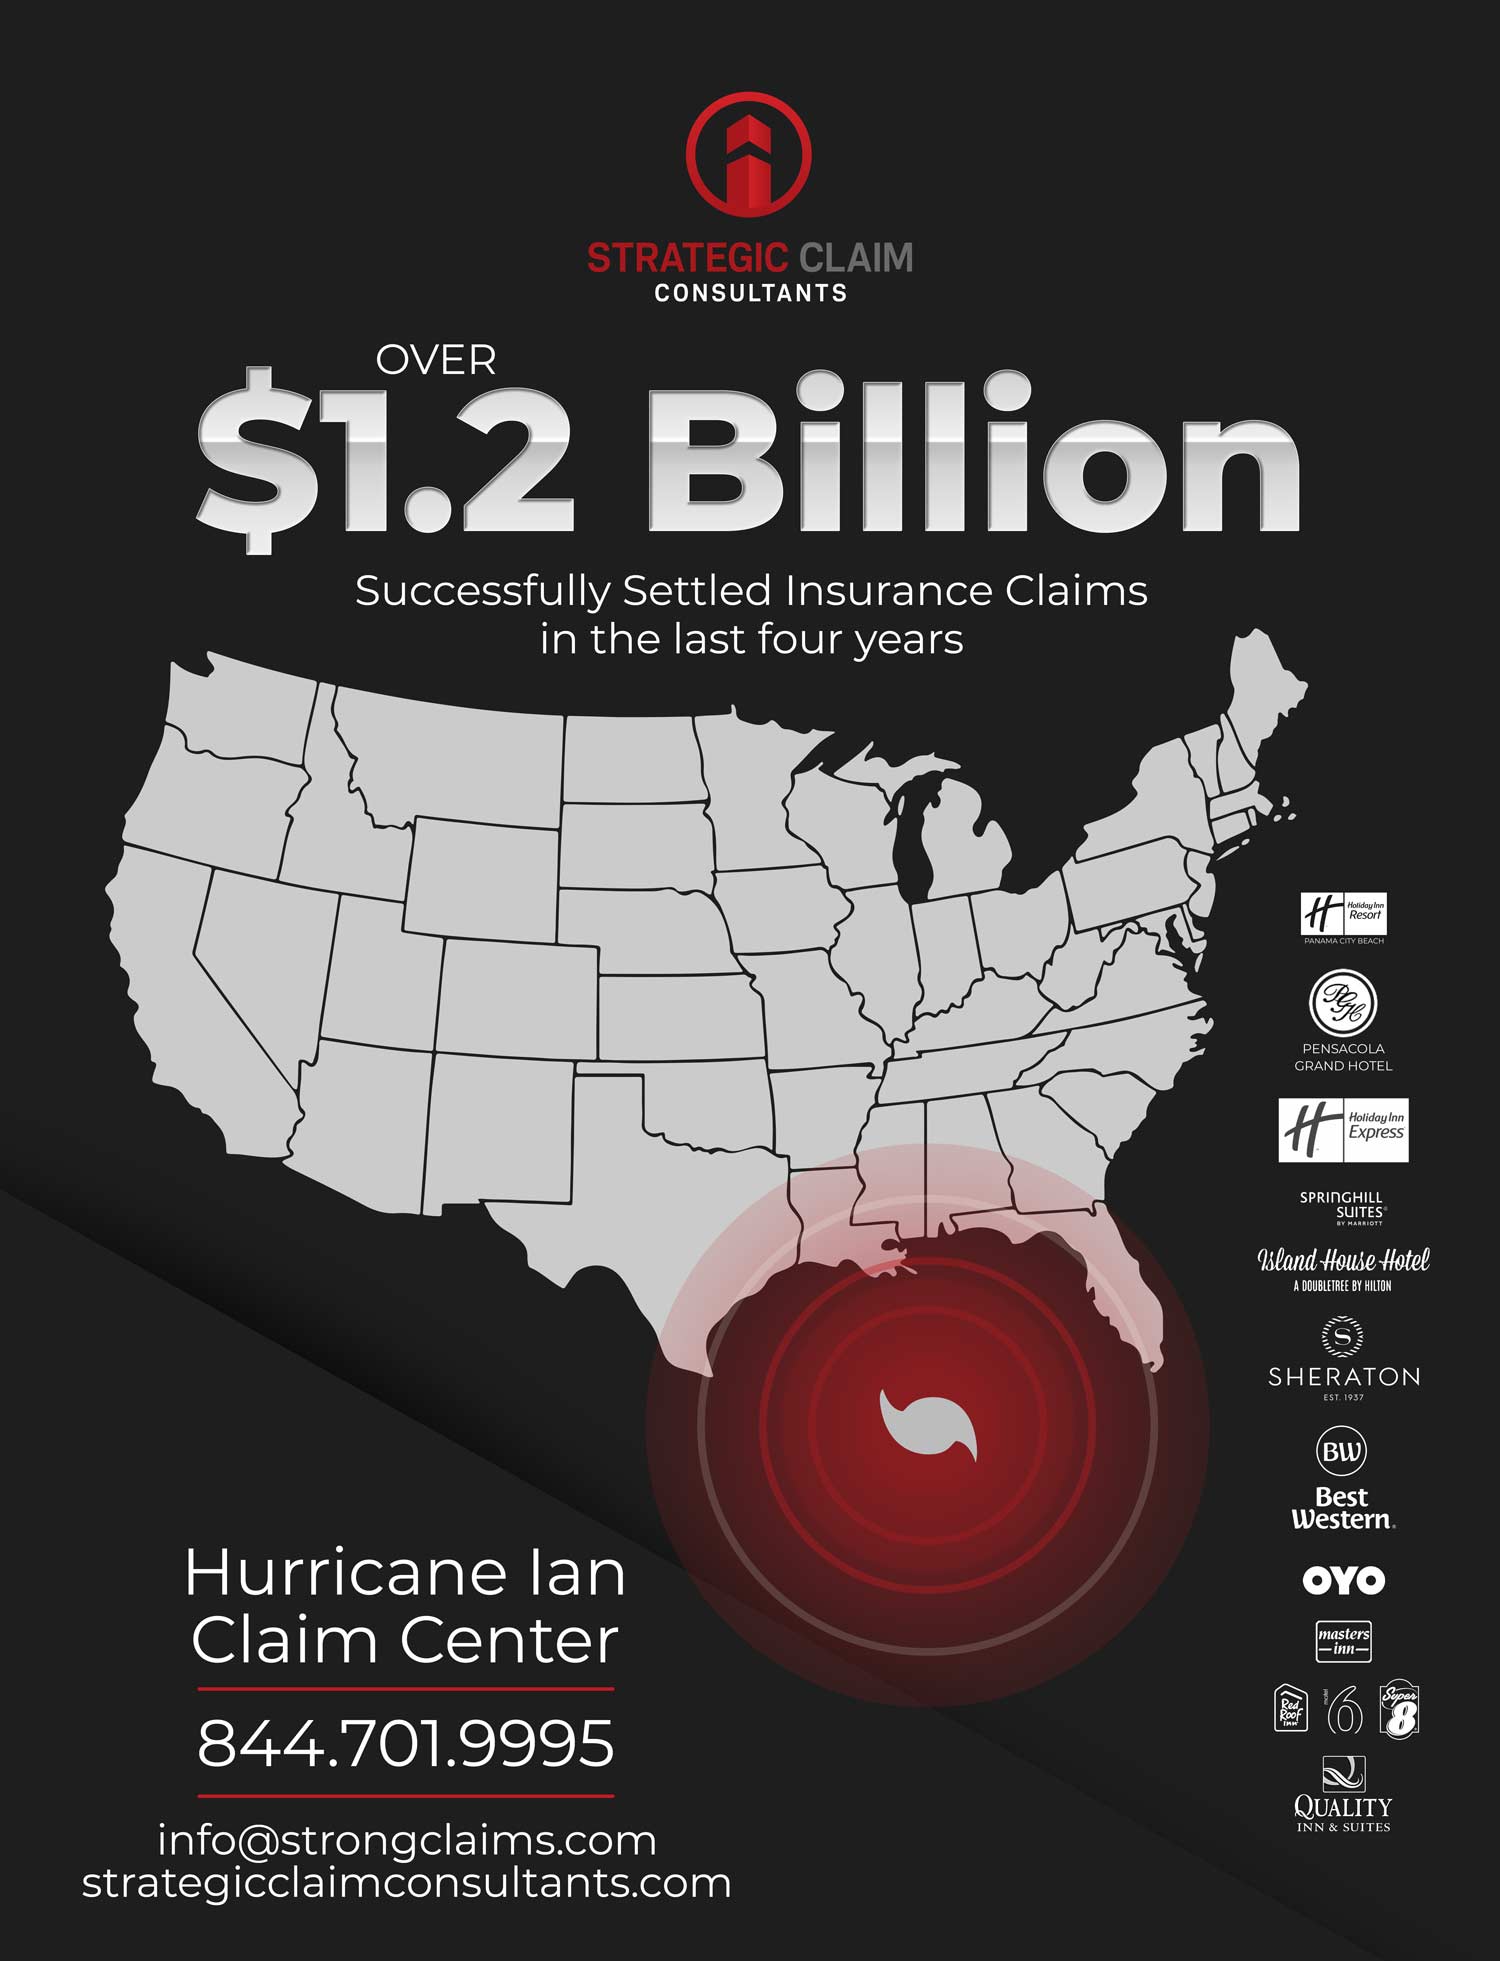 Help Center information for Hurricane Ian Insurance Claims; call 844-701-9995